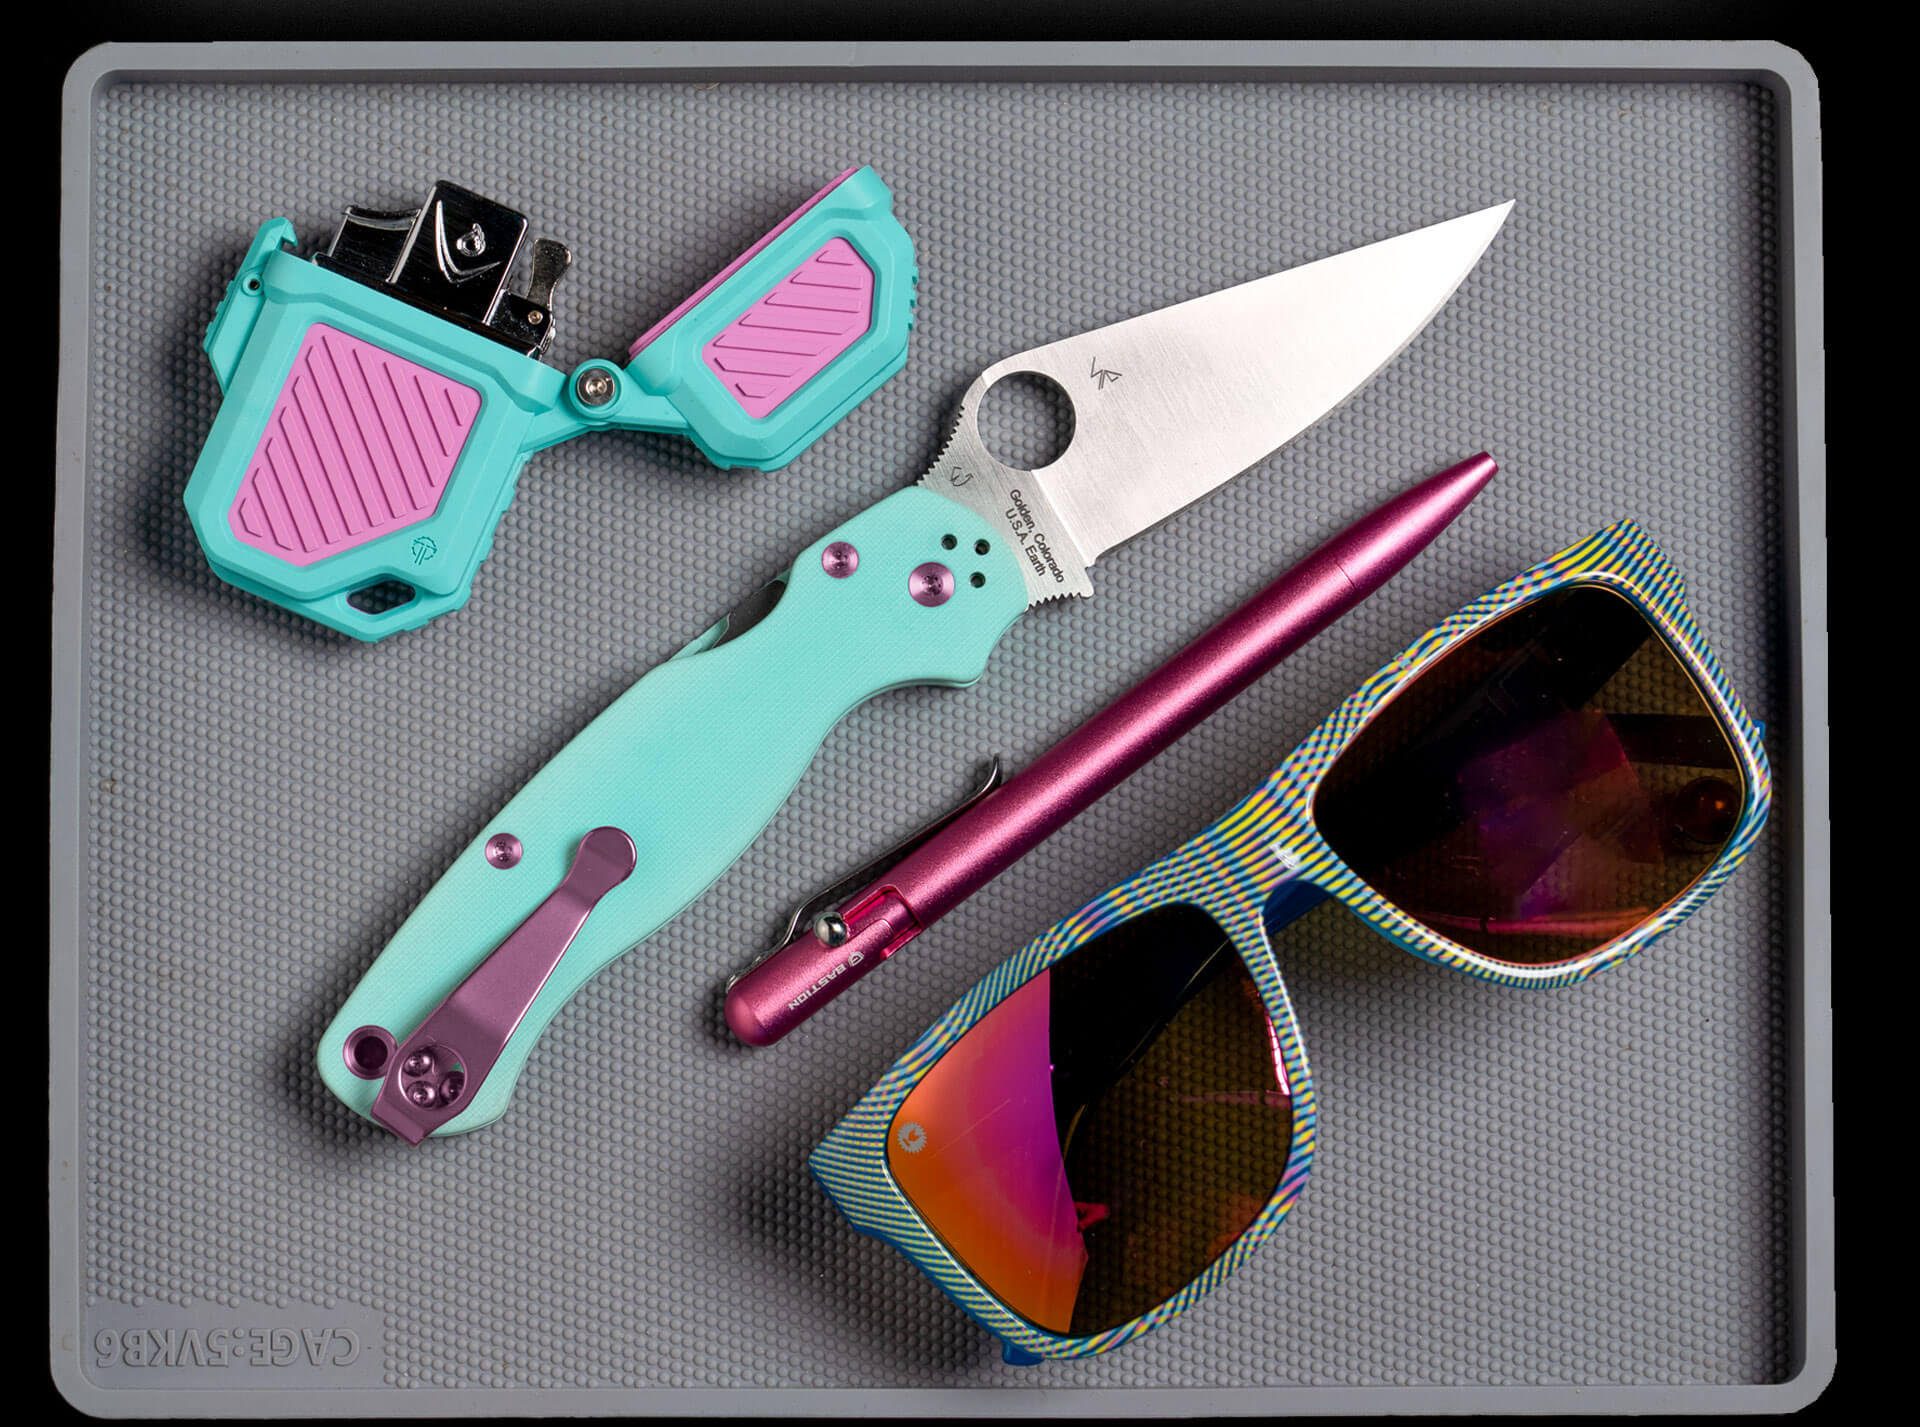 Everyday Carry Layout of PyroVault 2.0 Vice, Knife, Pen, and Sunglasses